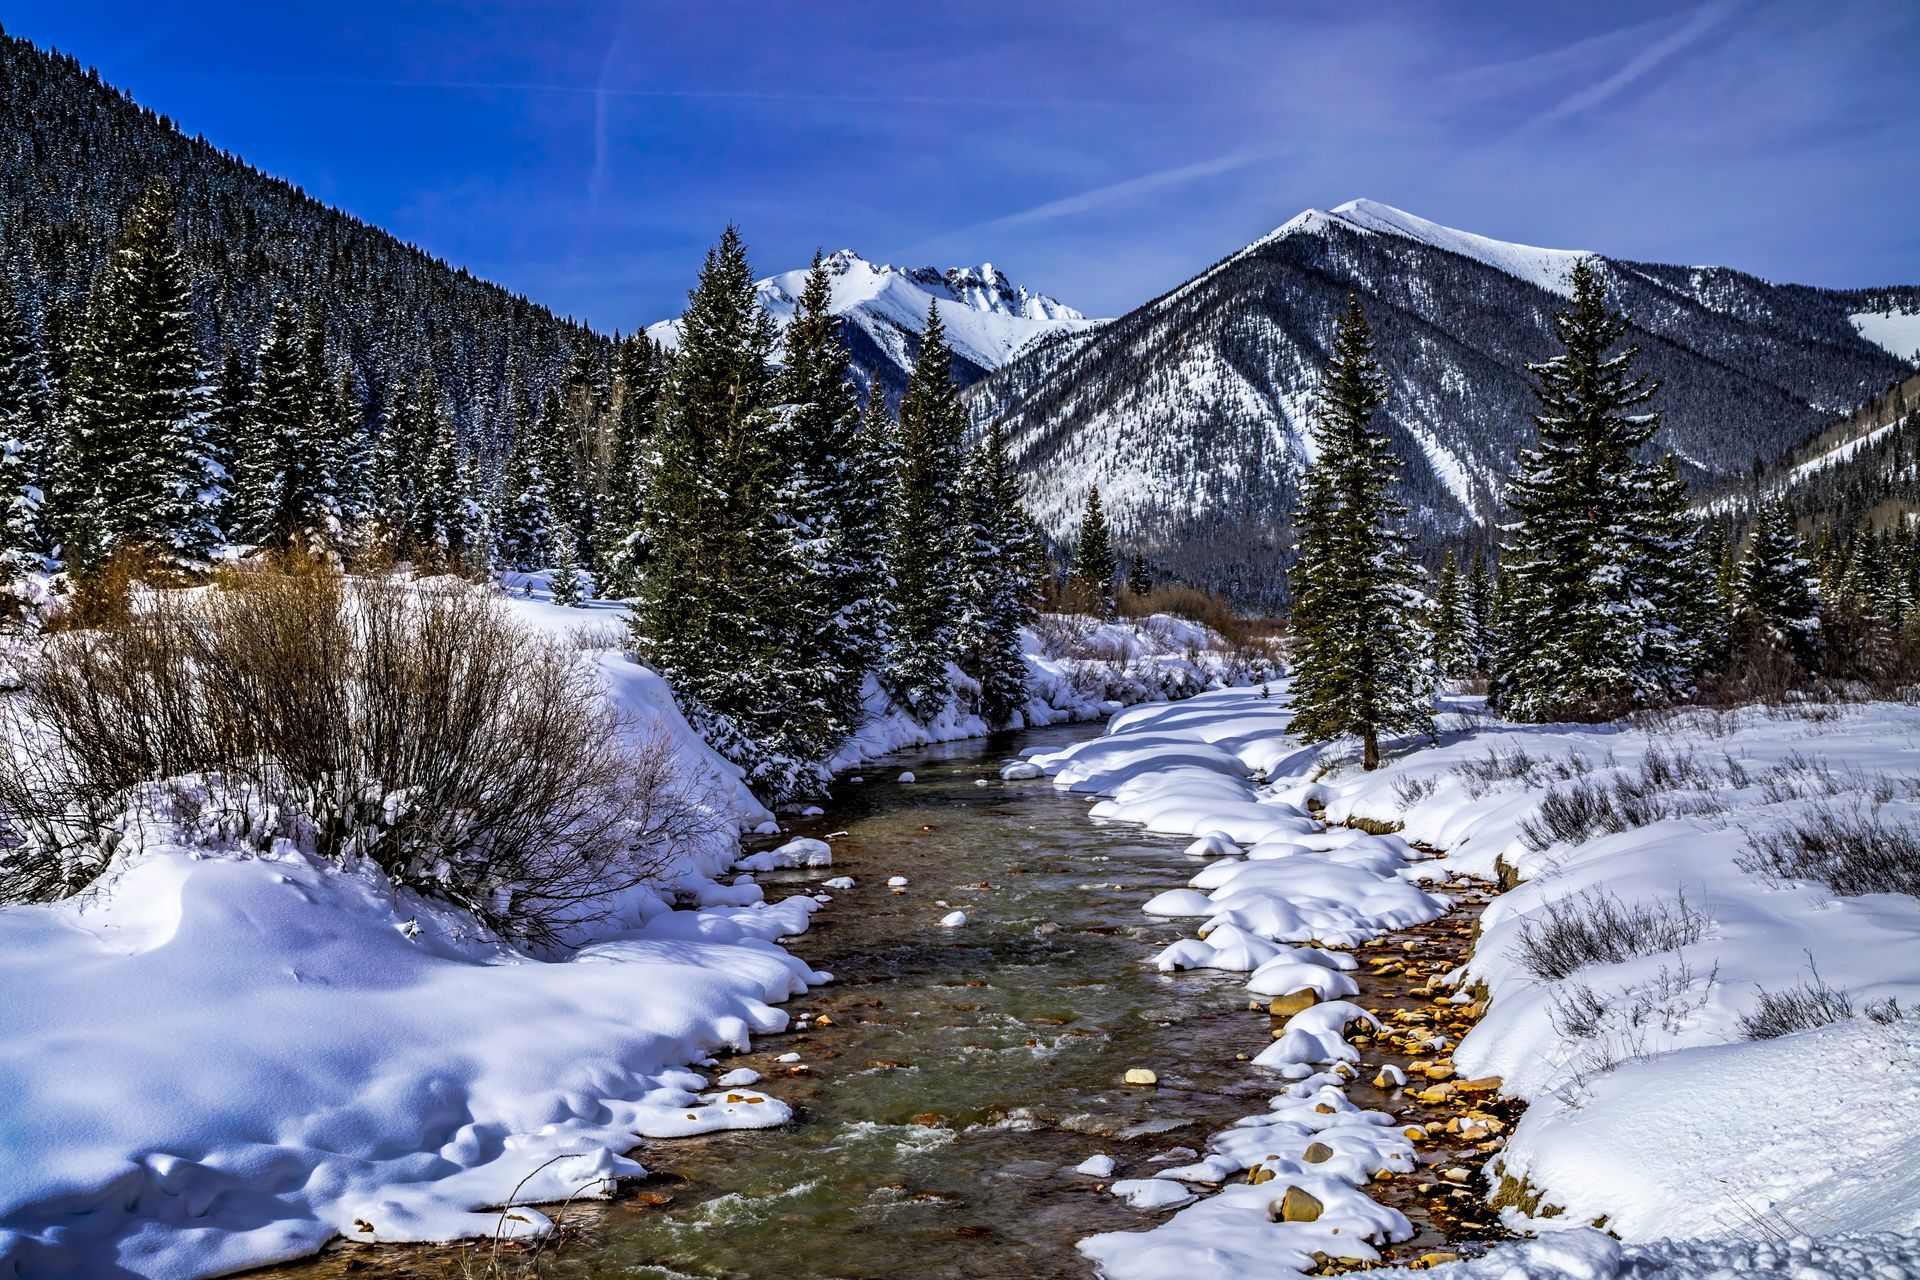 A river running through a snowy forest with mountains in the background.